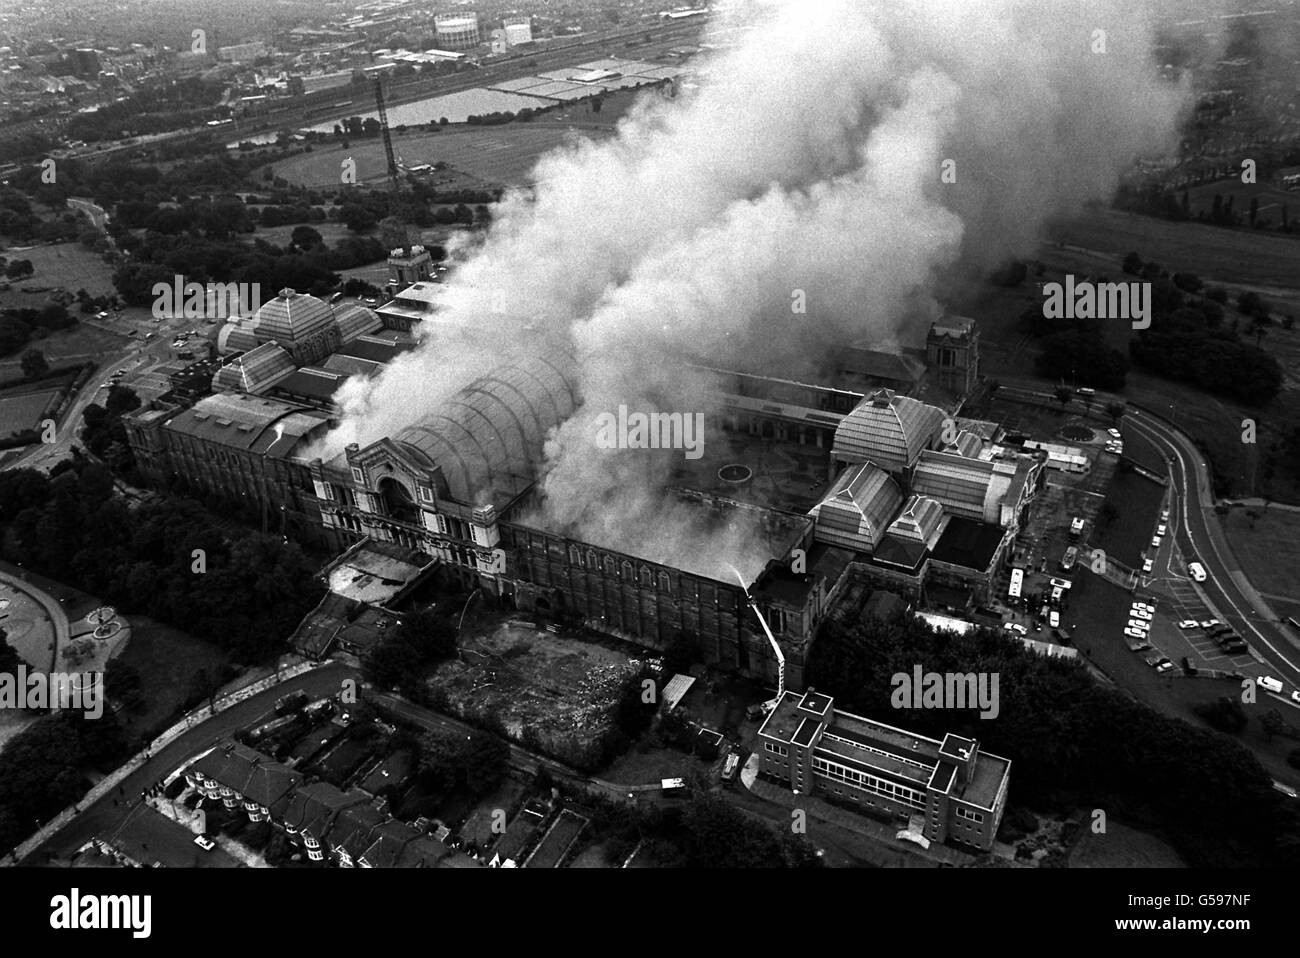 An aerial view of London's historic Alexandra Palace where more than 200 firemen were fighting a major blaze at the Victorian complex. The Great Hall (the barrel-shaped structure shrouded in smoke) of the Palace, built in 1875, was severely damaged. No one is thought to have been hurt. Stock Photo